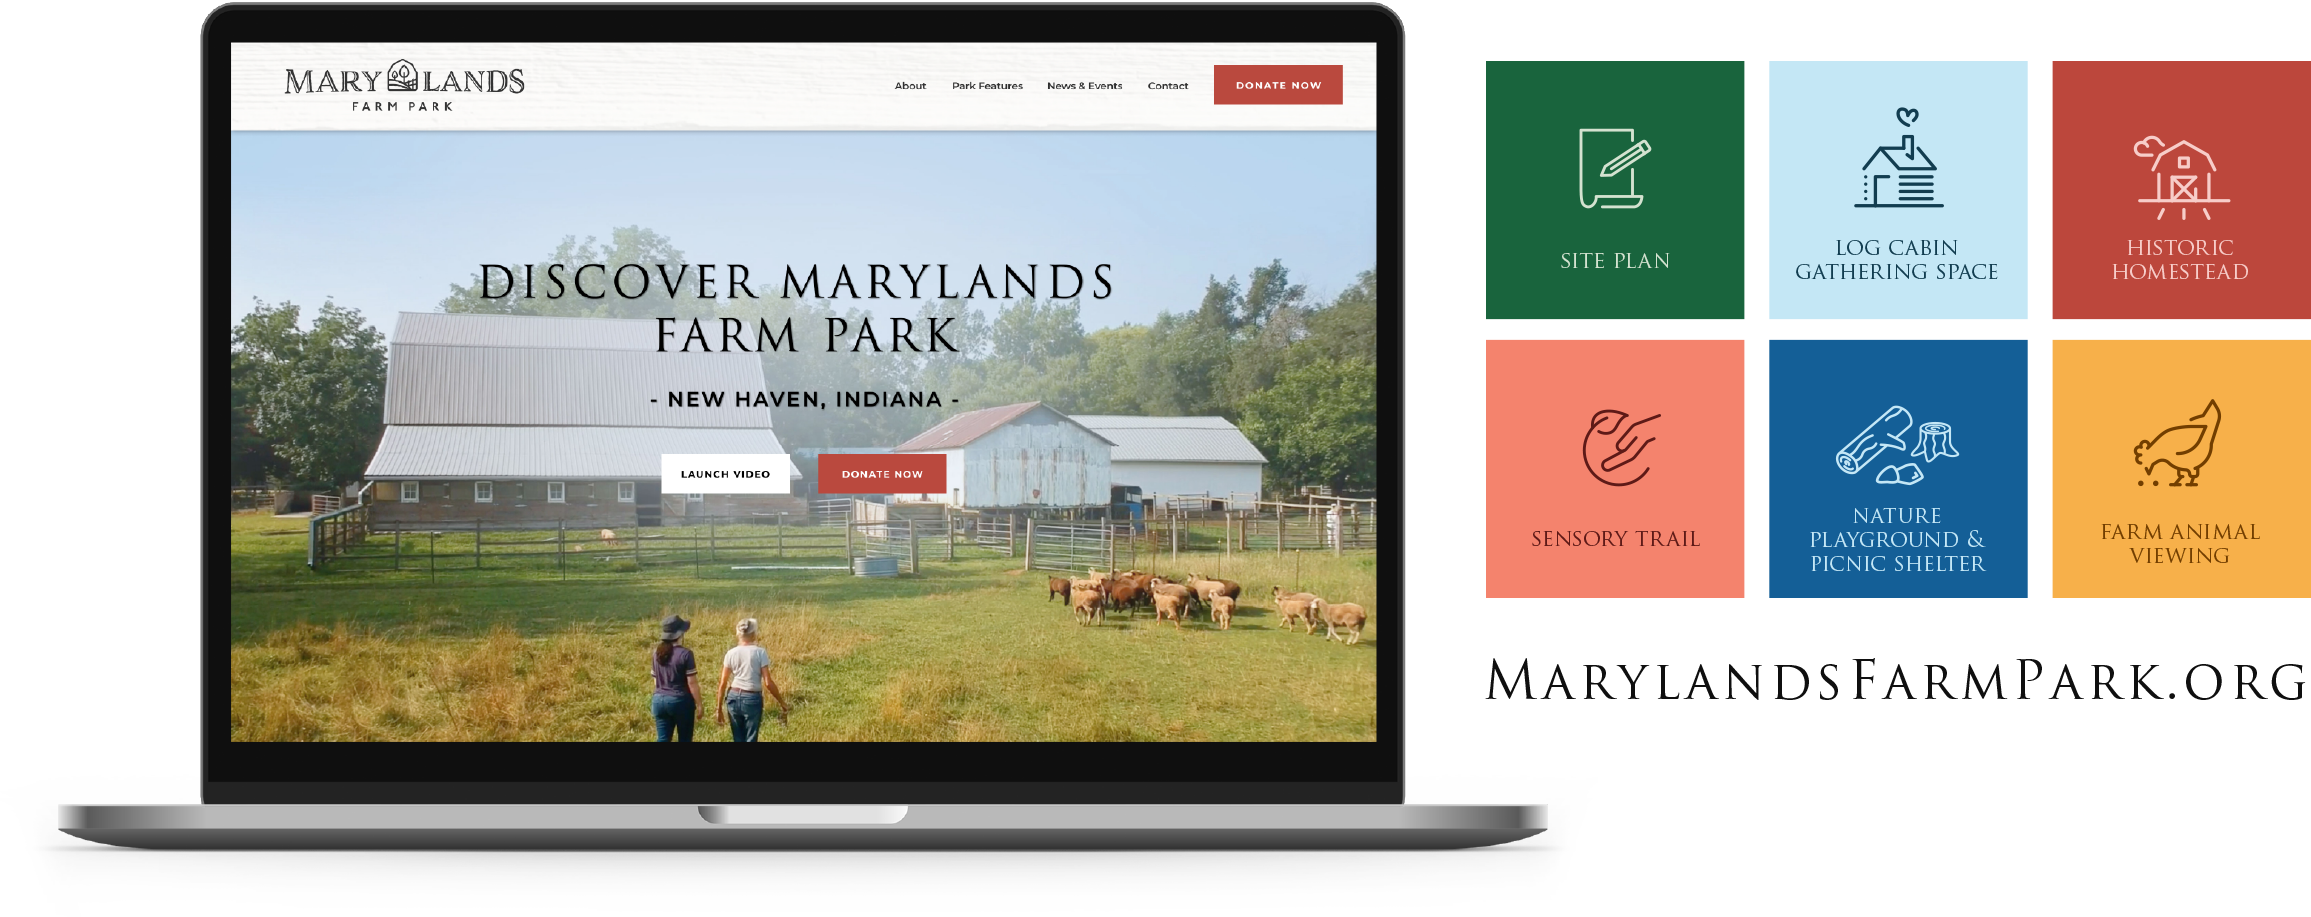 Marylands Farm Park website home page, navigation features, and URL.